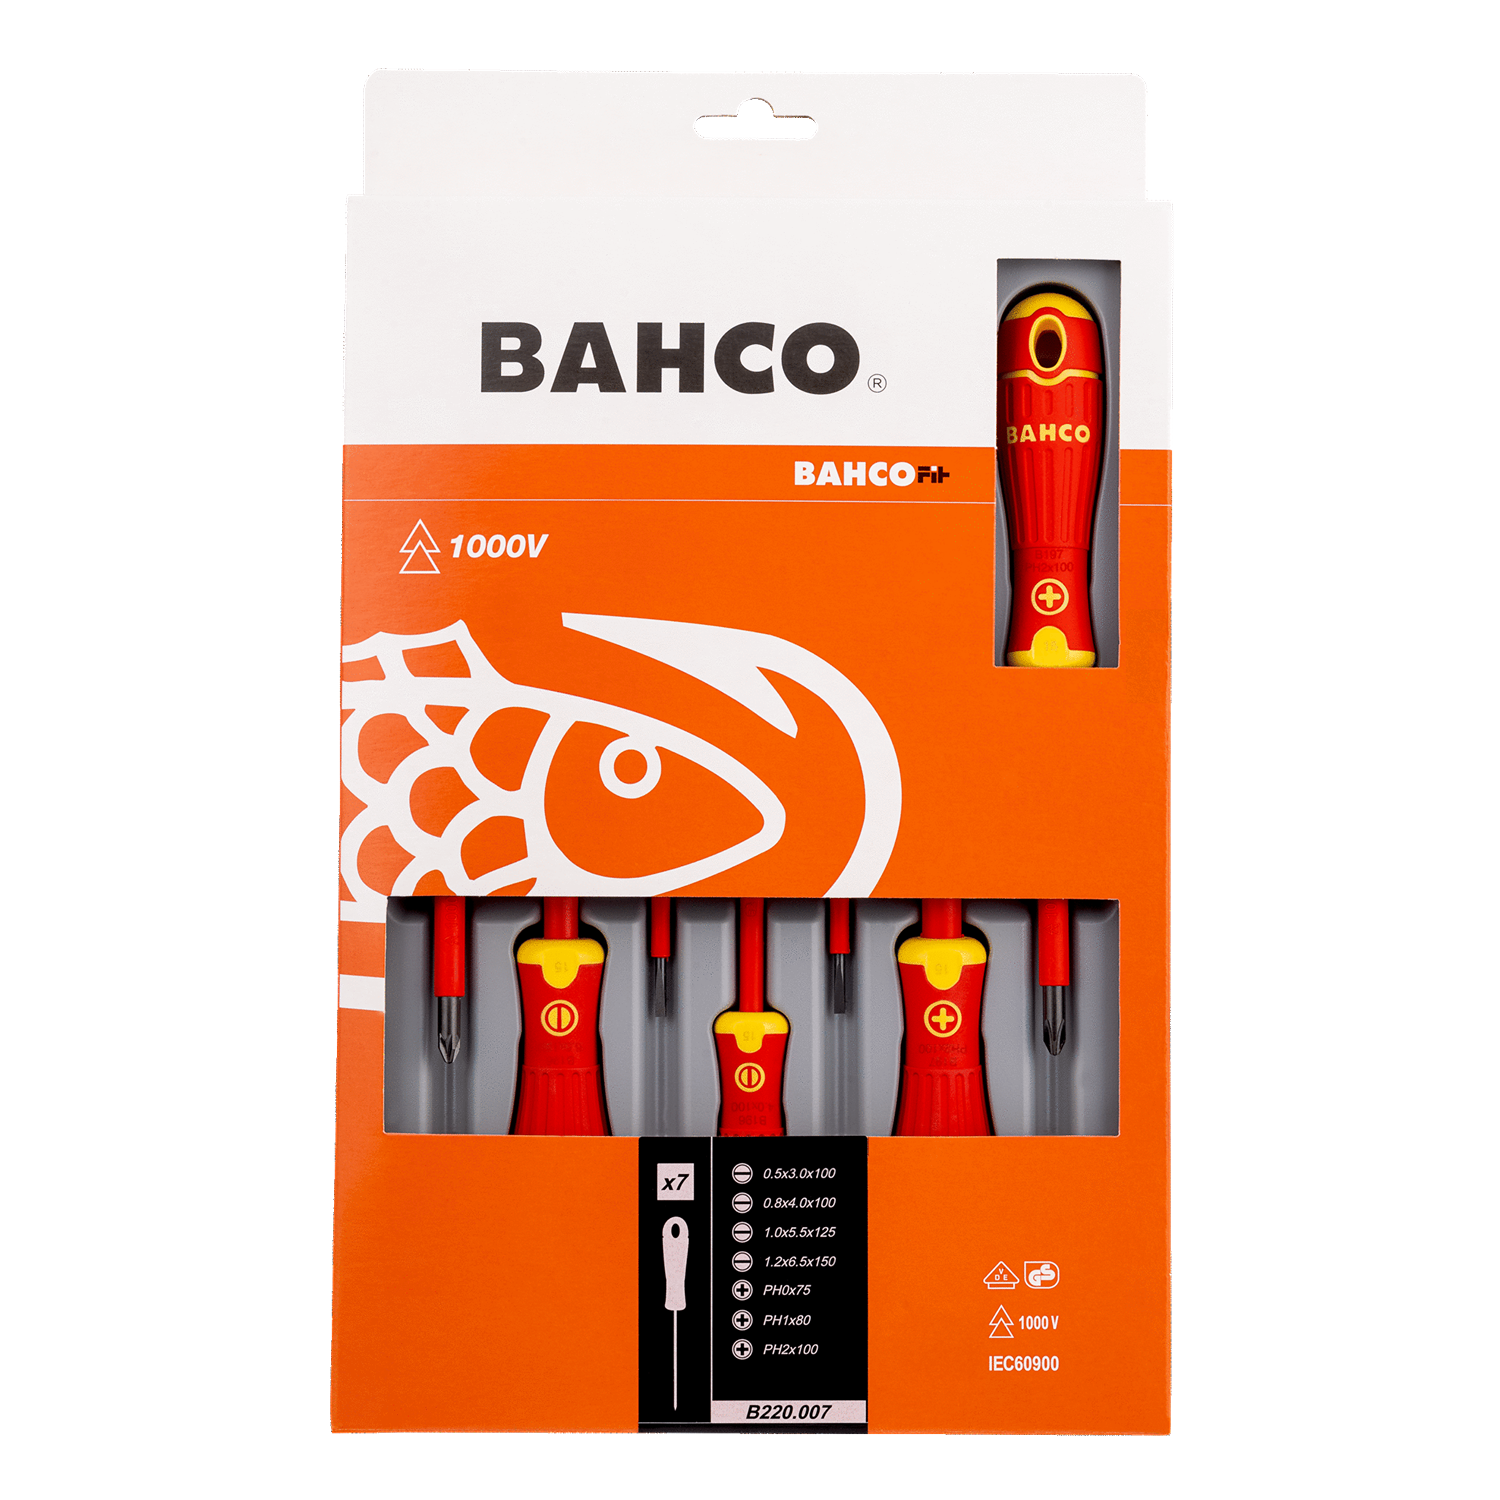 BAHCO B220.007 BahcoFit VDE Slotted/Phillips Screwdriver Set 7pcs - Premium Screwdriver Set from BAHCO - Shop now at Yew Aik.